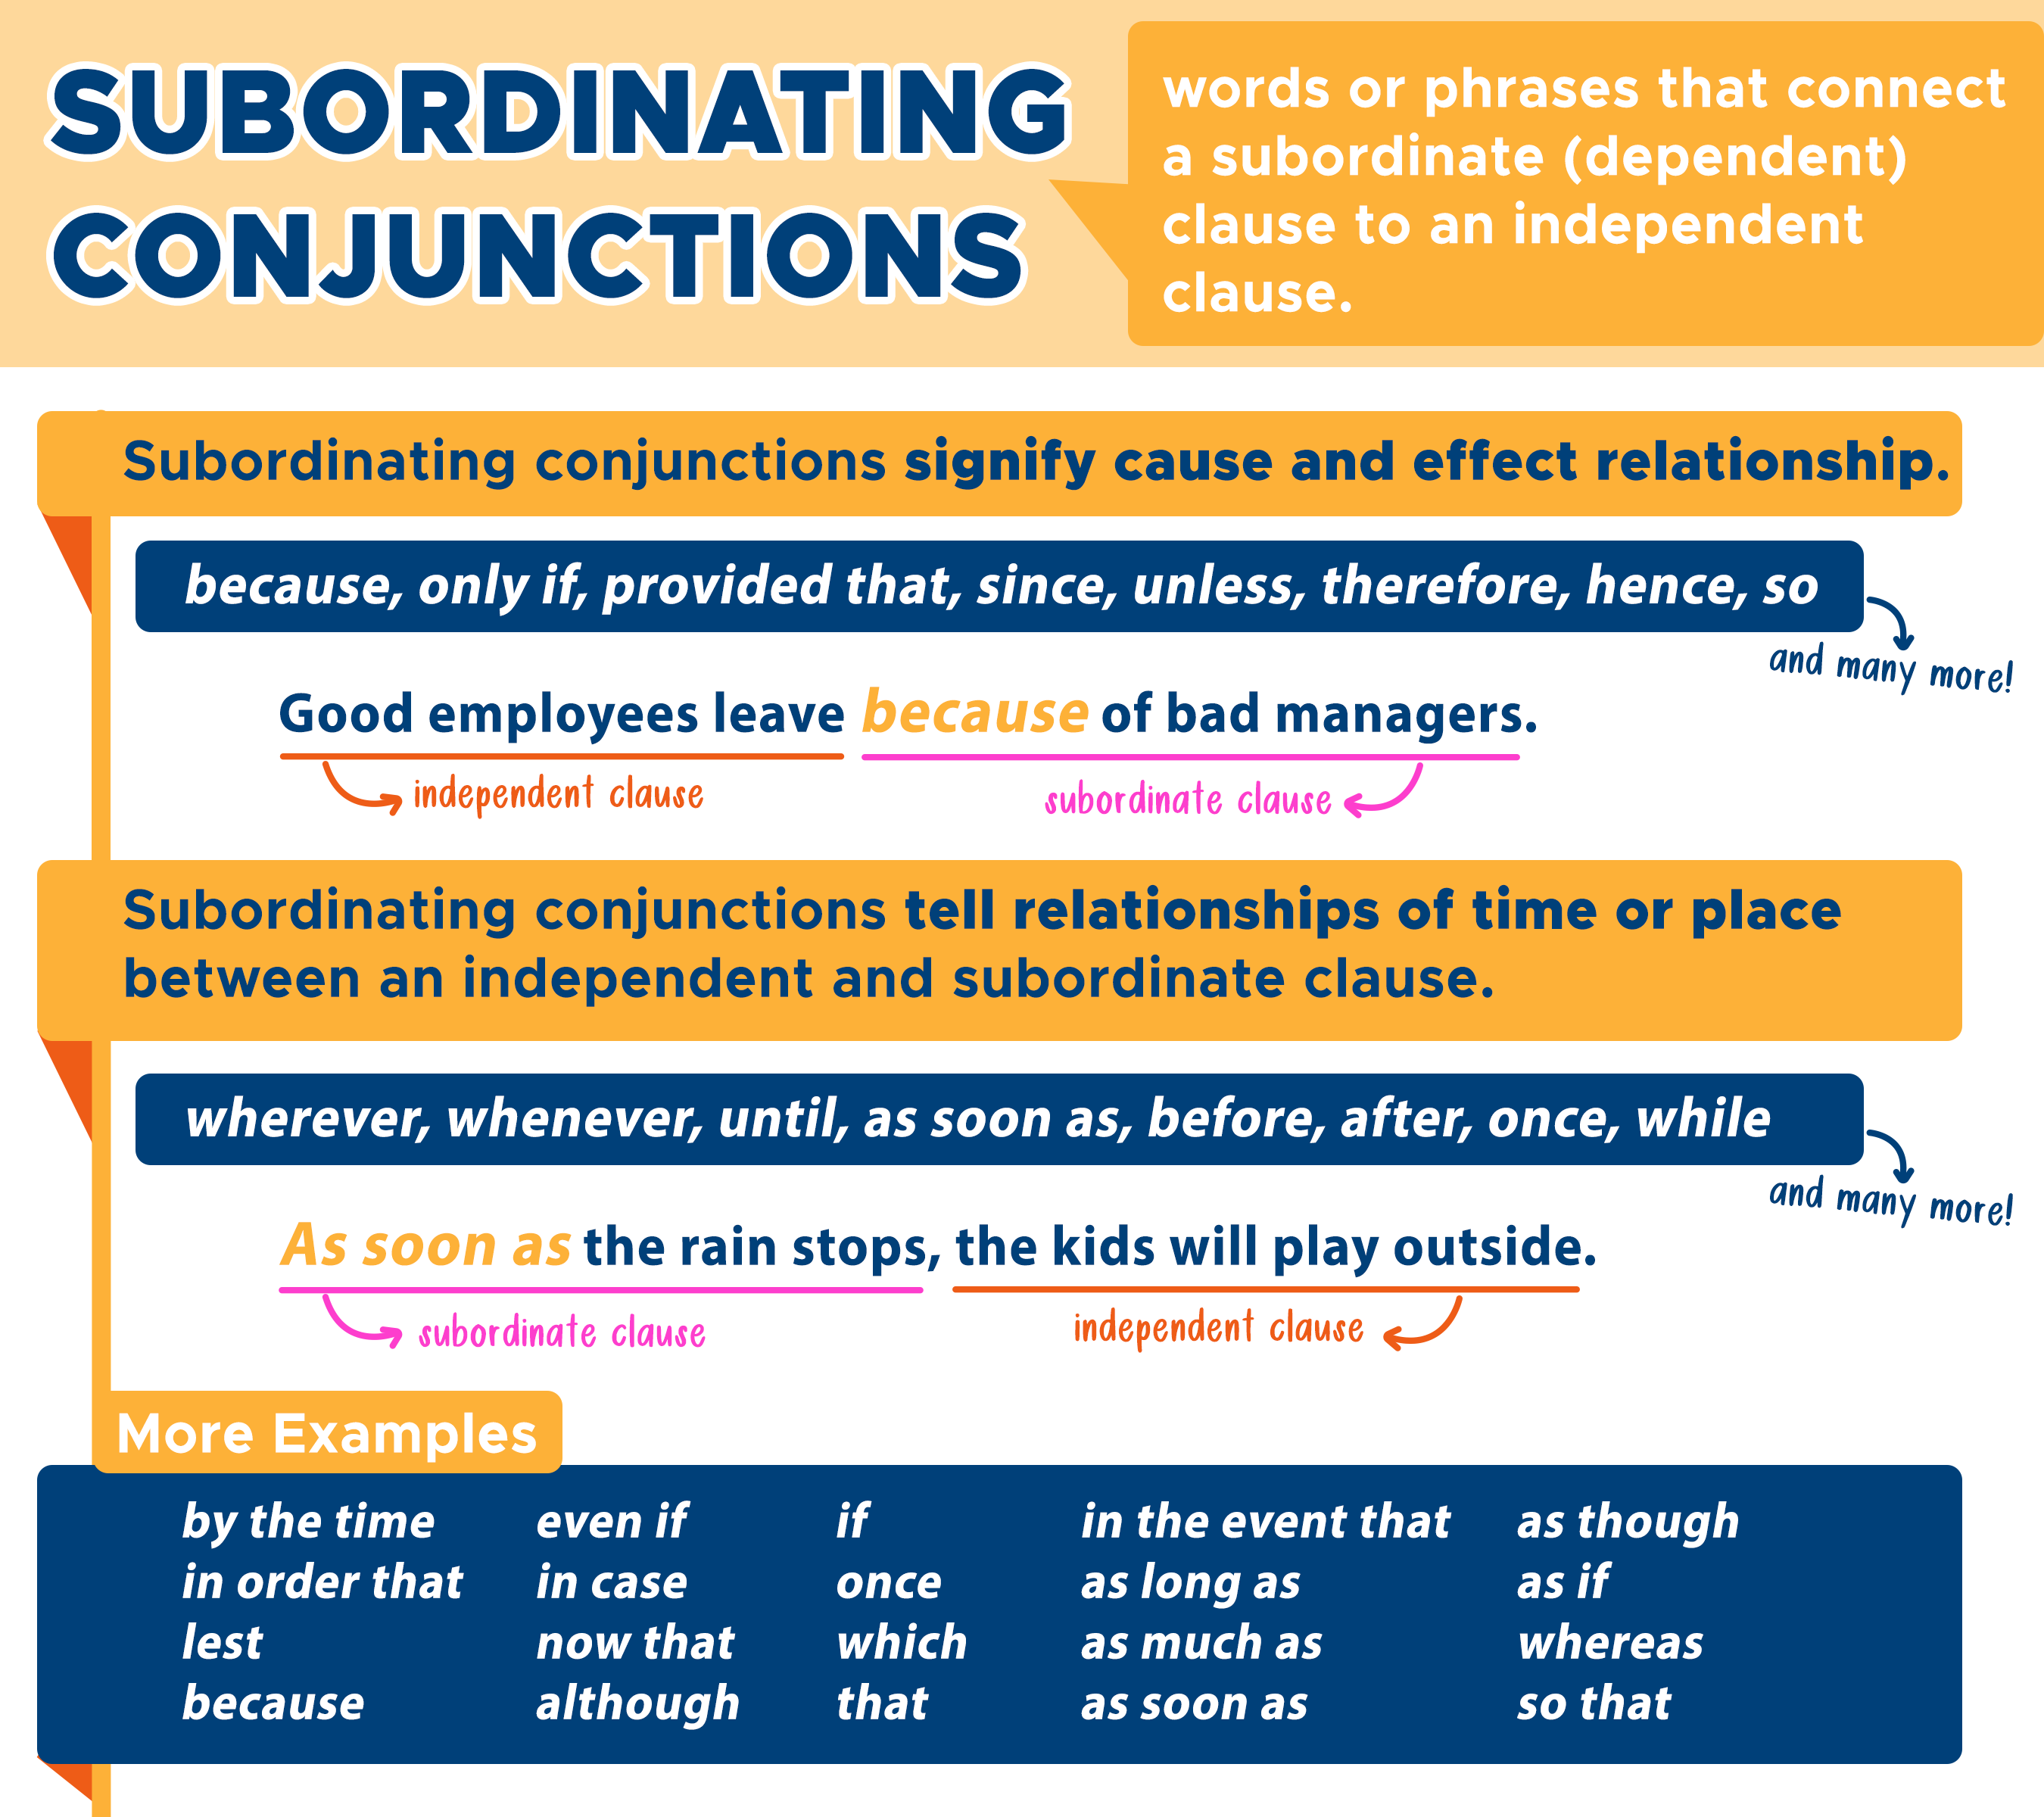 FANBOY Coordinating Conjunctions Connect Independent 